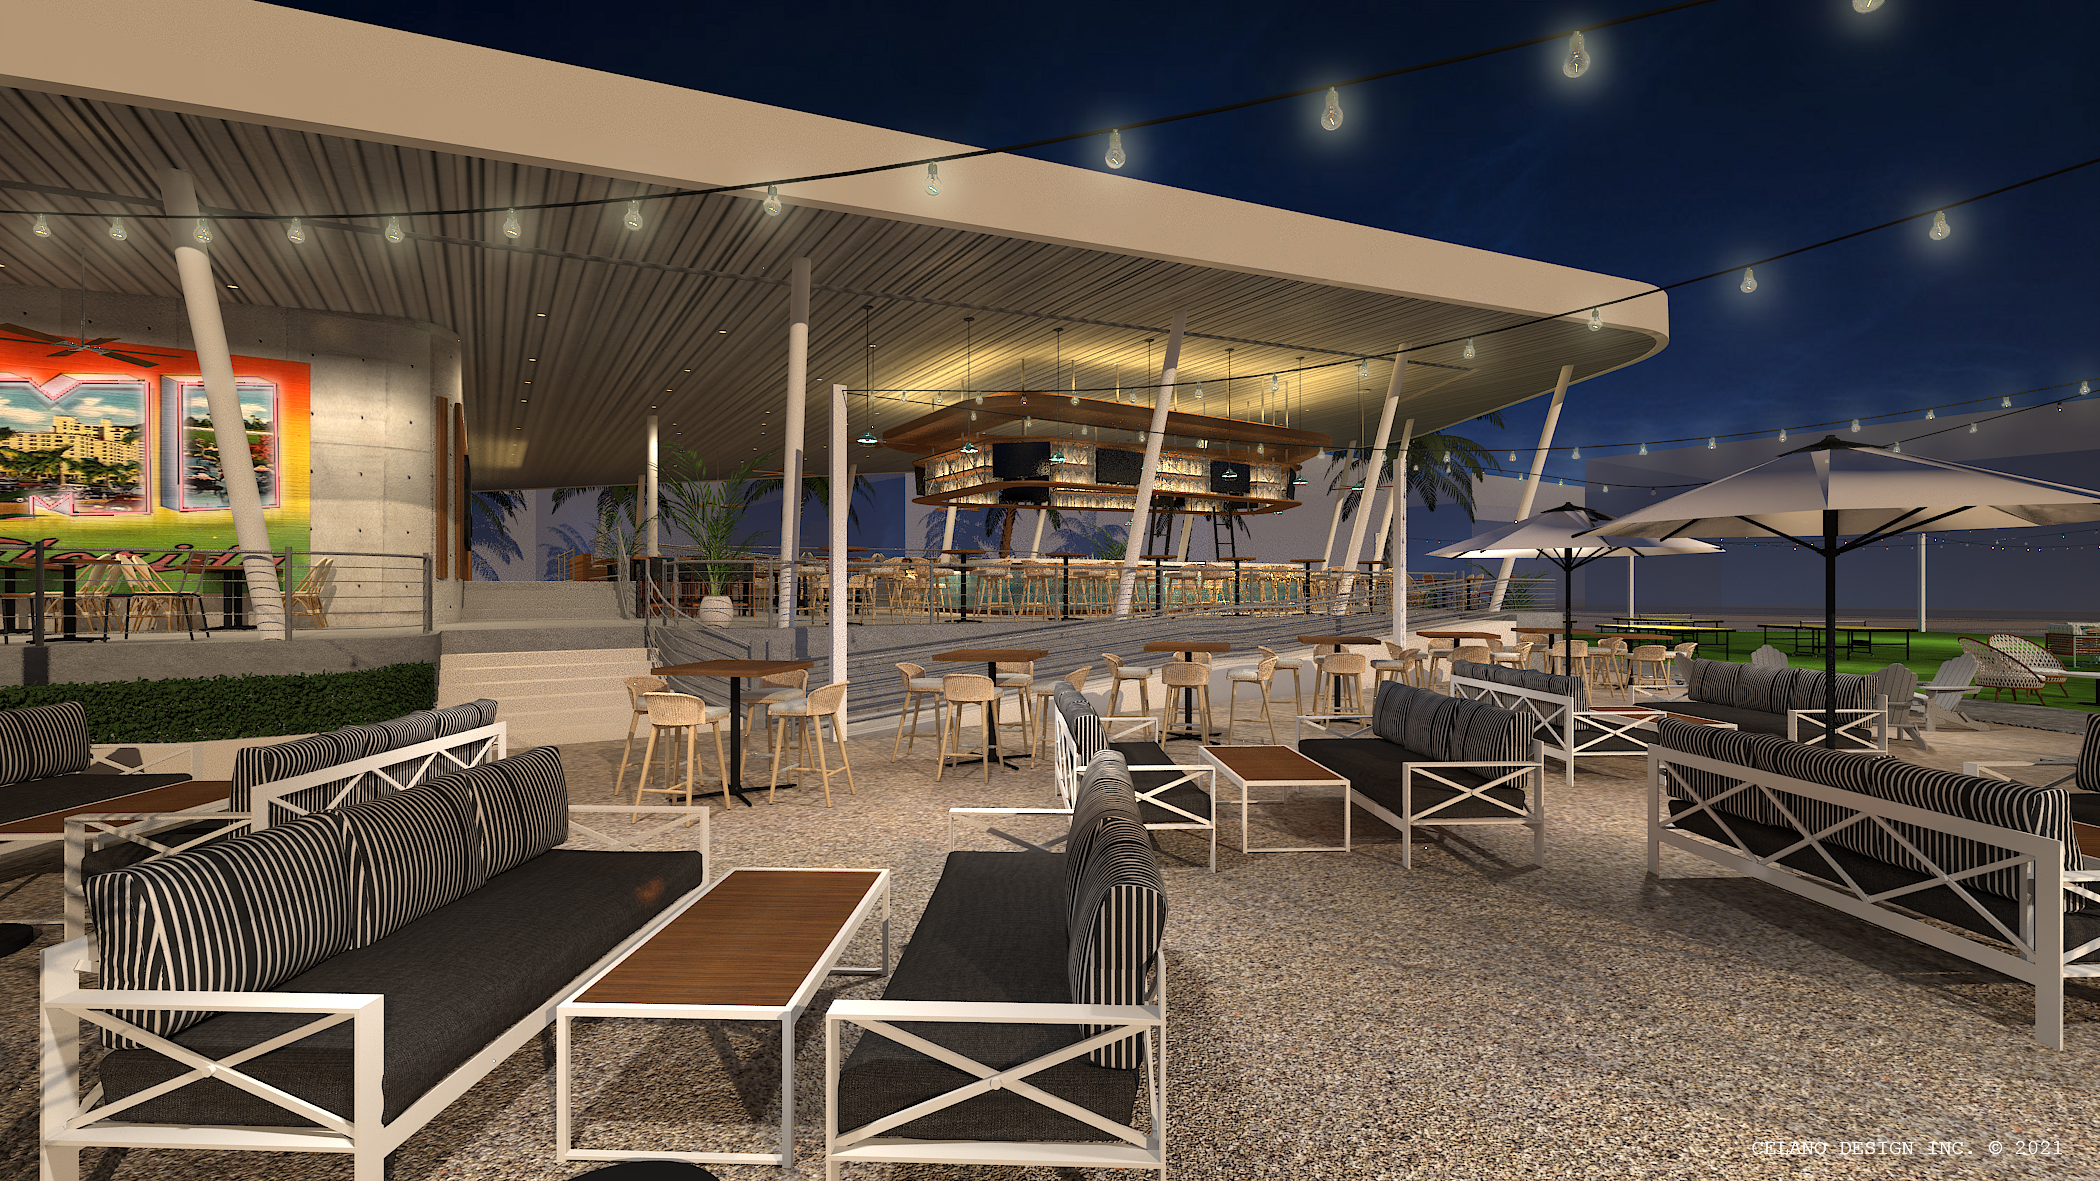 rendering of an outdoor cafe